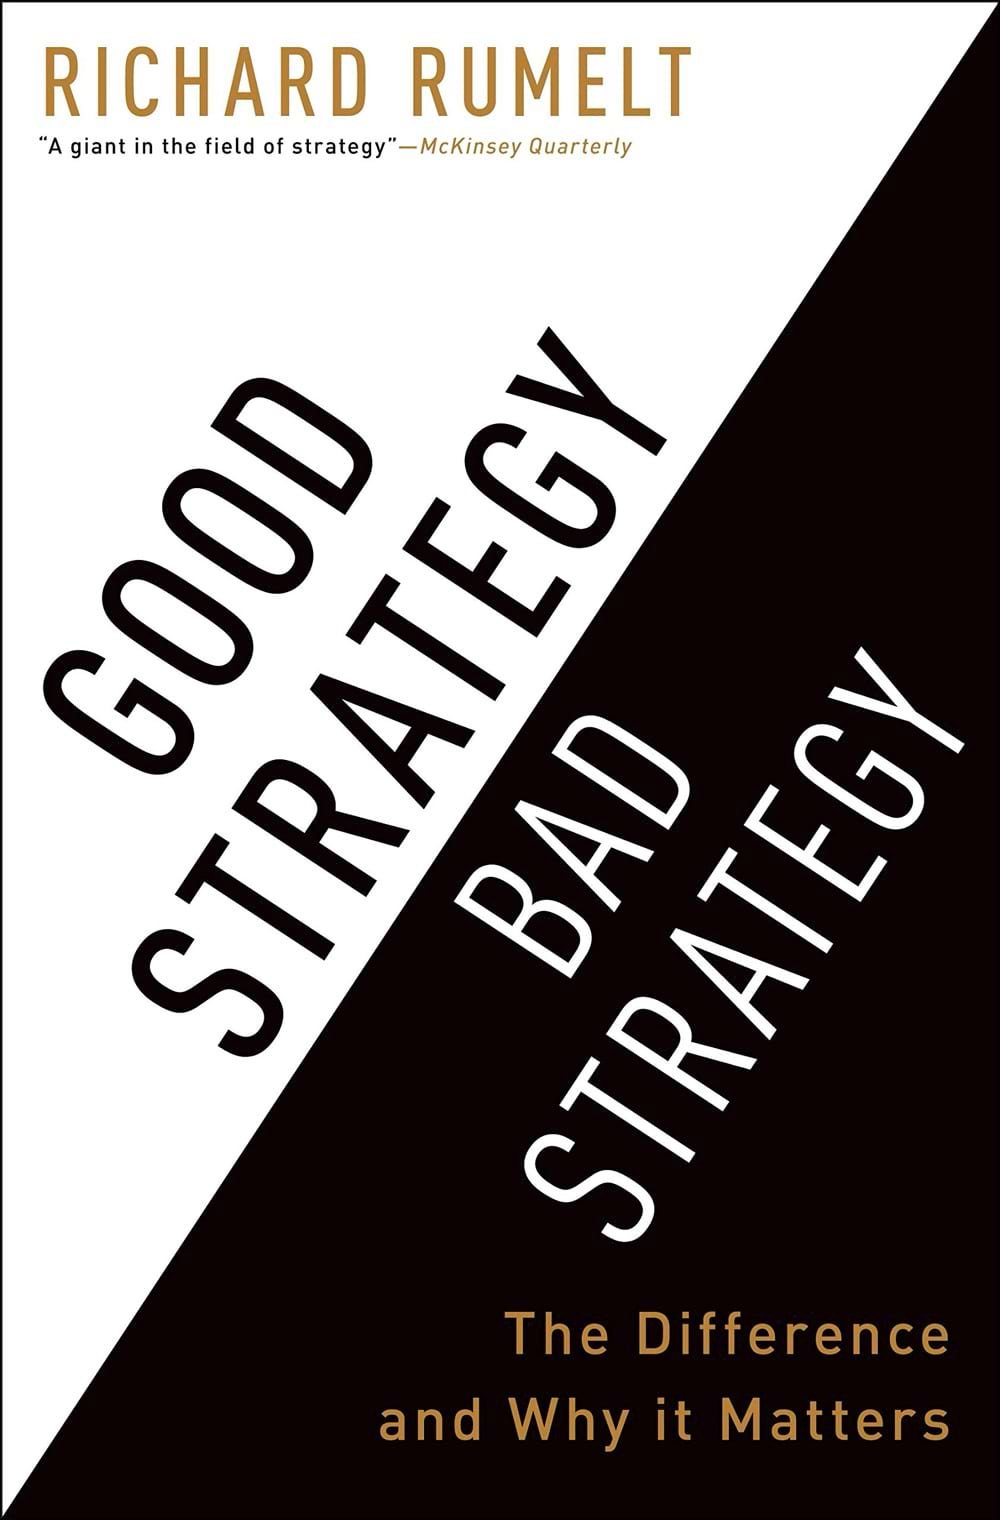 The cover of Good Strategy, Bad Strategy